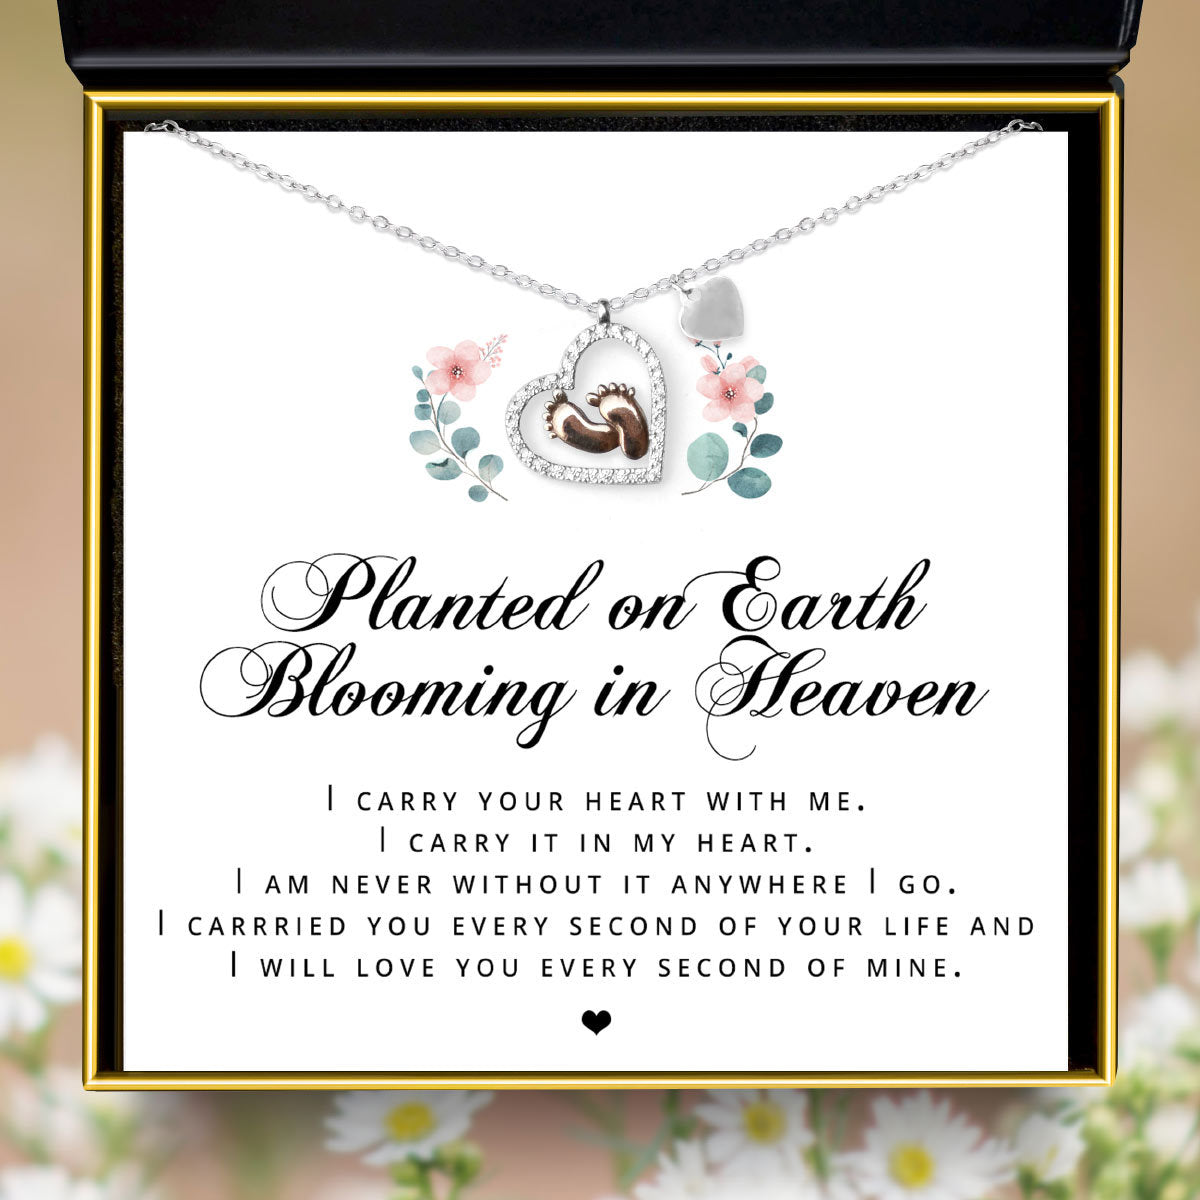 Planted on Earth, Blooming in Heaven - Baby Feet Heart Pendant Necklace Gift Set